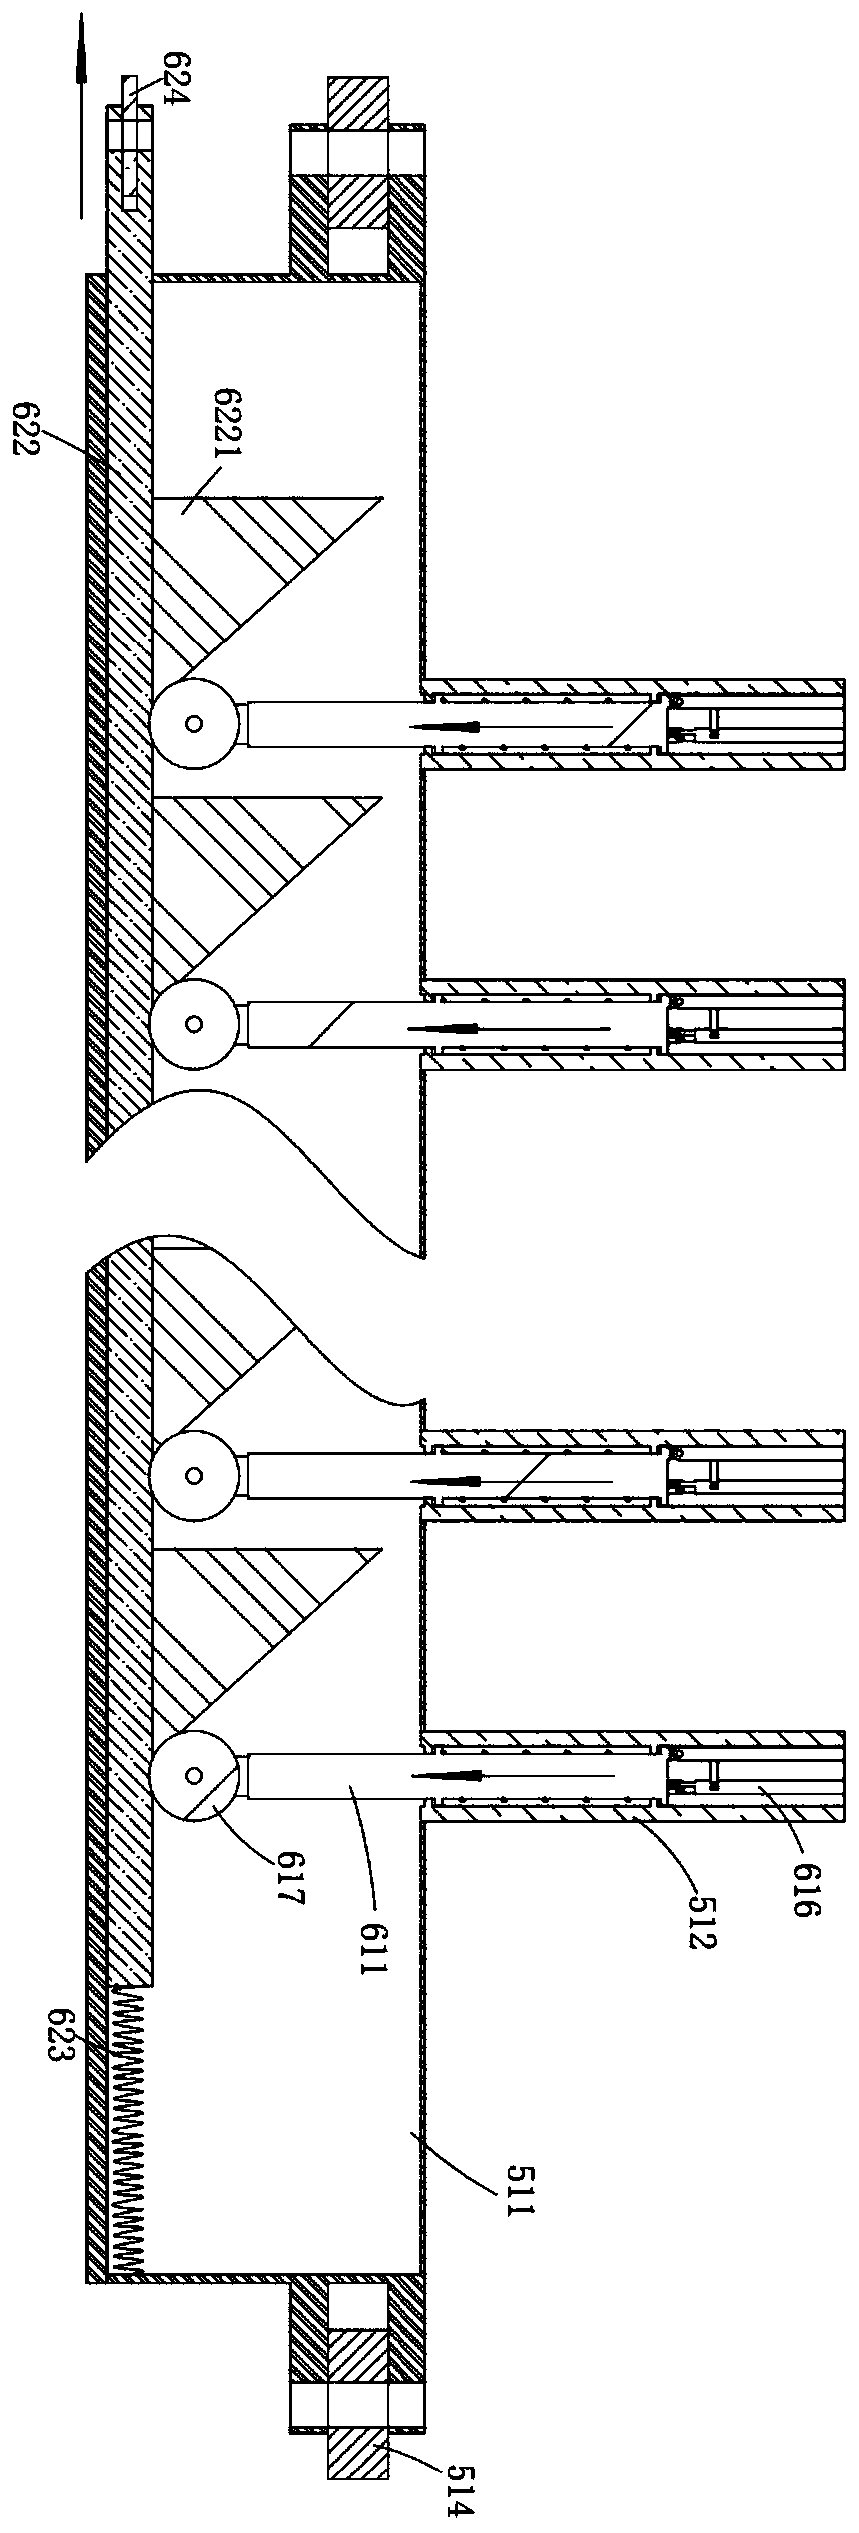 Prefabricated part full-automatic pouring device capable of raking materials